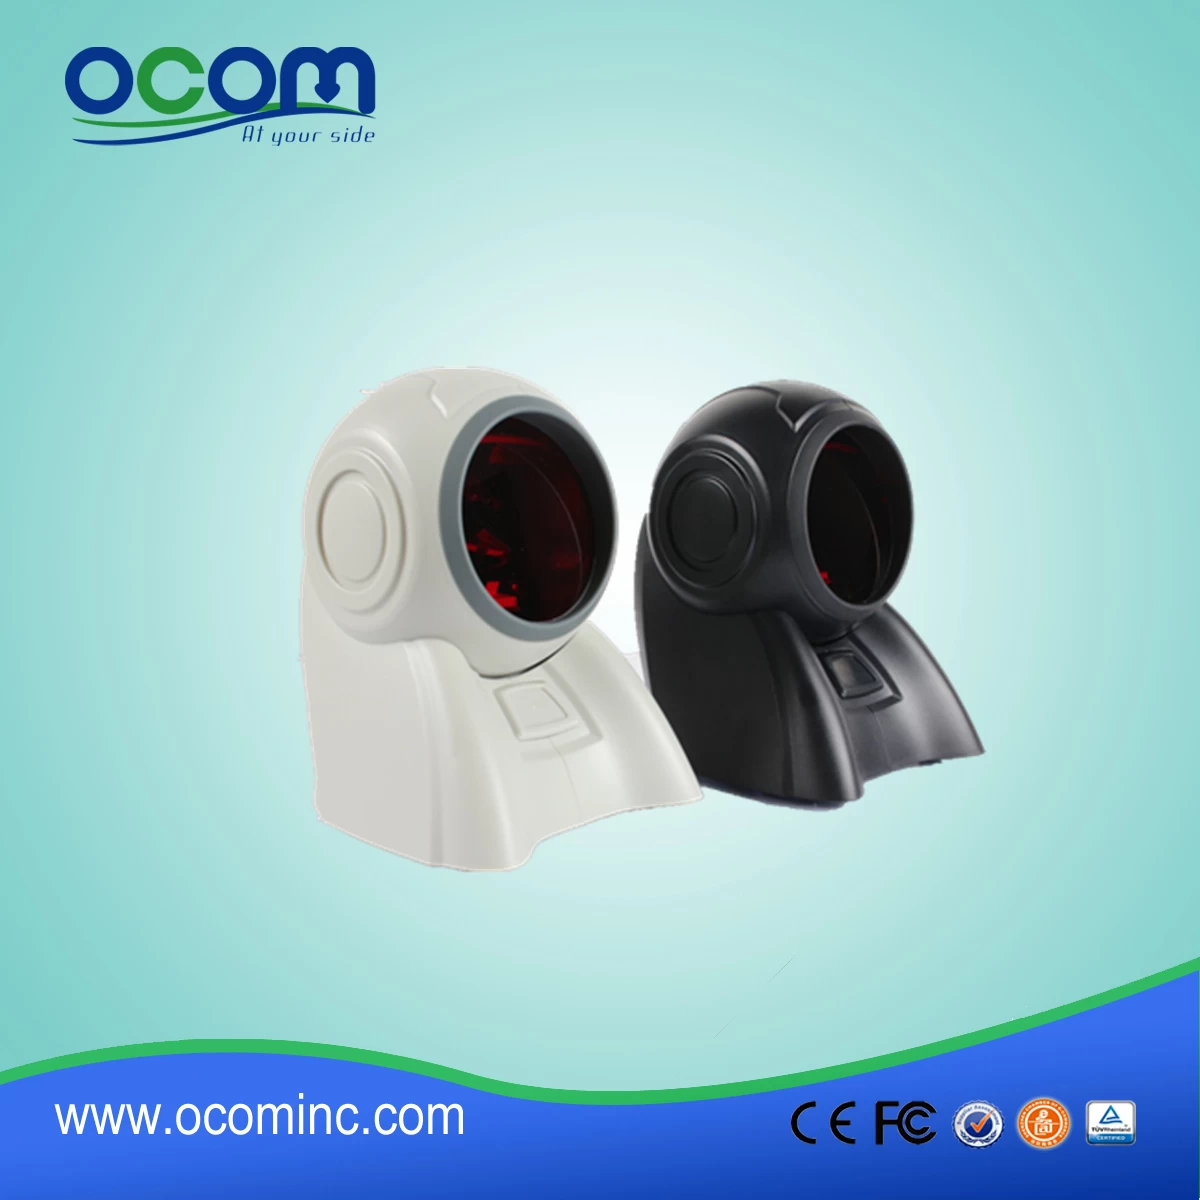 android Omni barcode laser scanner inventory, table top omni barcode scanner